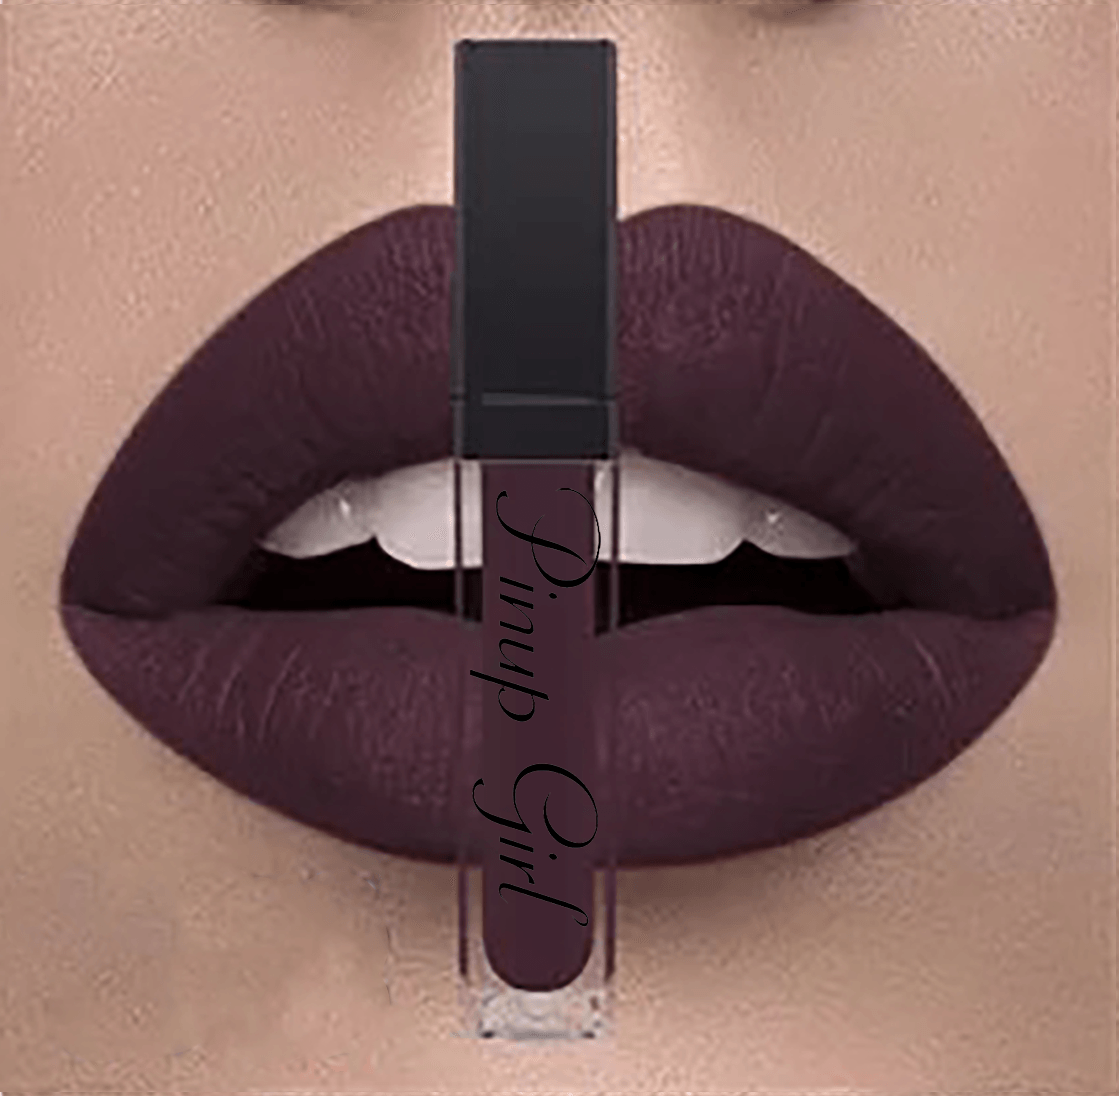 Pictured is a swatch of the Pinup Girl Clothing no smudge liquid matte lipstick in Satin Glove Purple